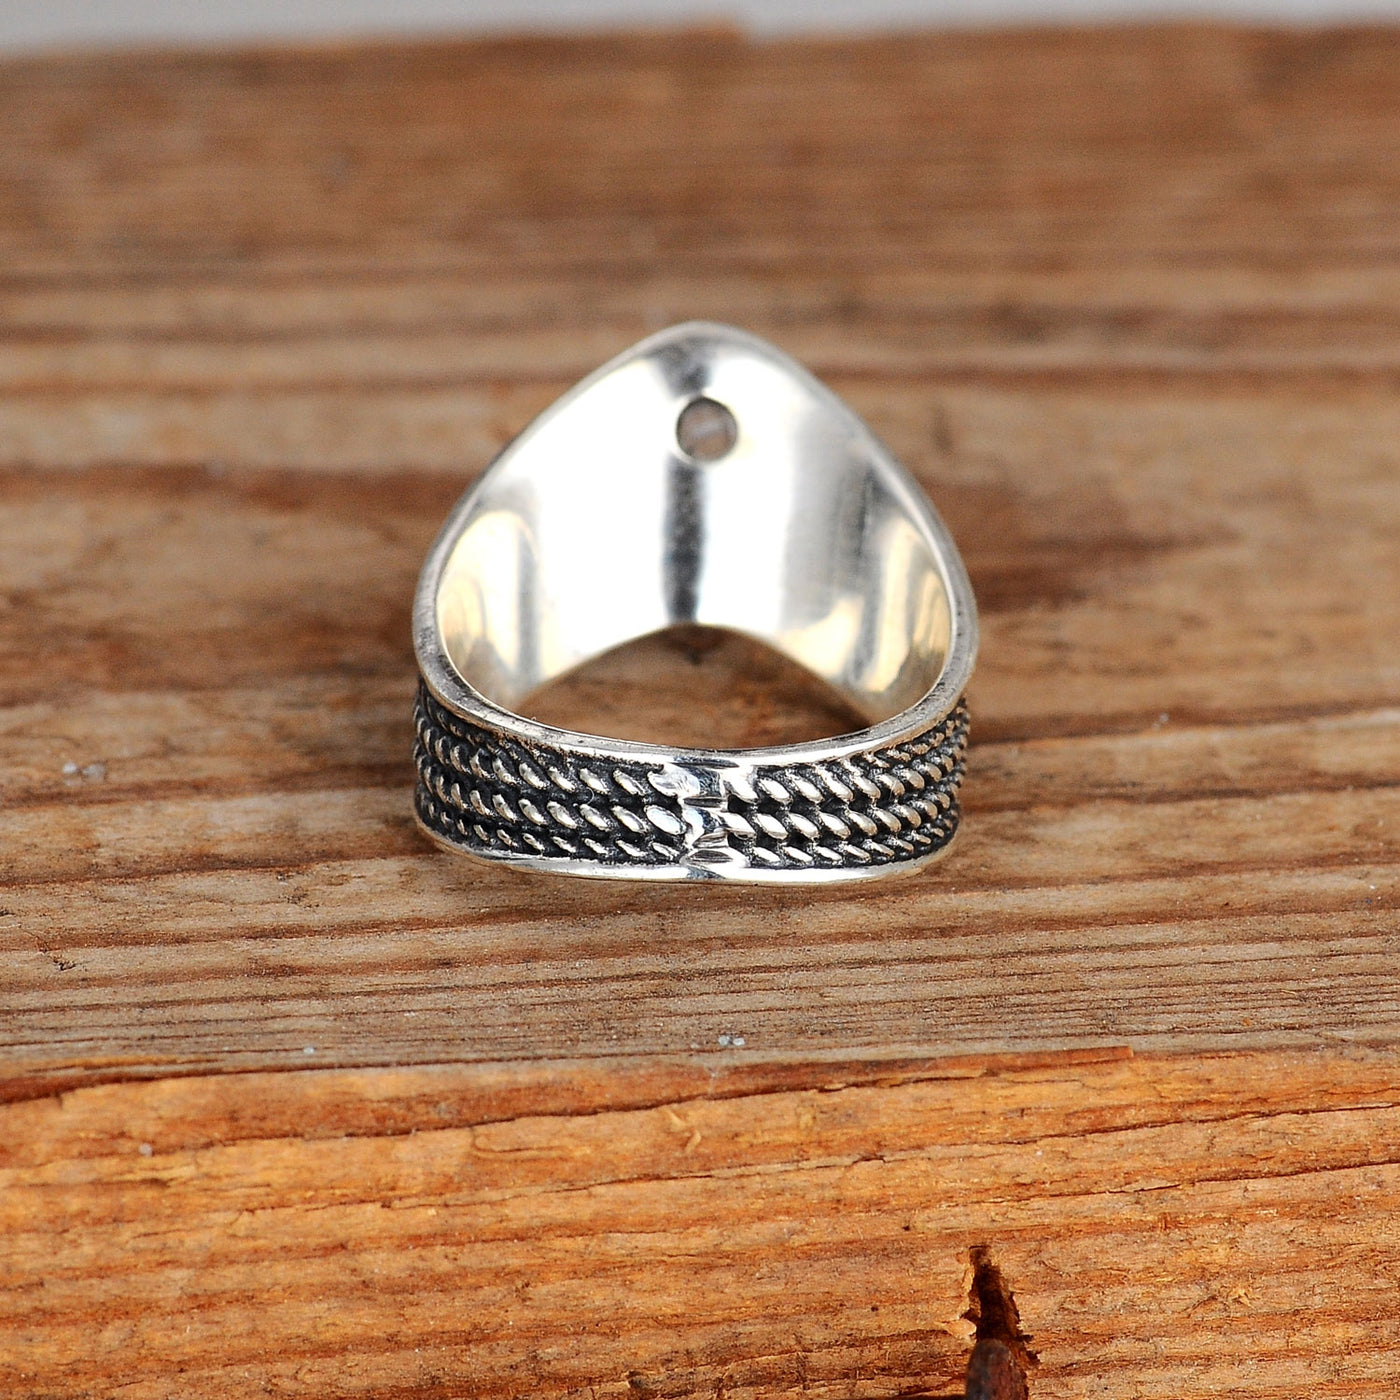 The Coolest Thumb Rings For Both Men & Women! | Thumb rings, Thumb rings  silver, White gold engagement rings unique